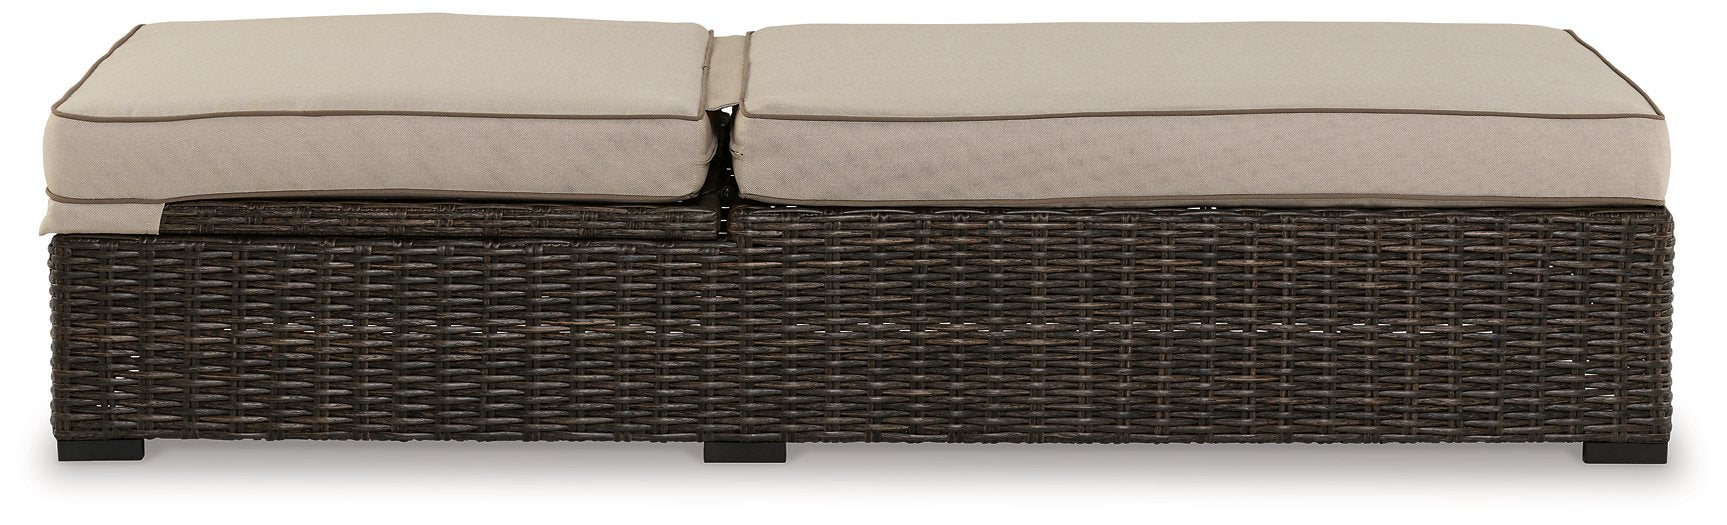 Coastline Bay Outdoor Chaise Lounge with Cushion - Evans Furniture (CO)